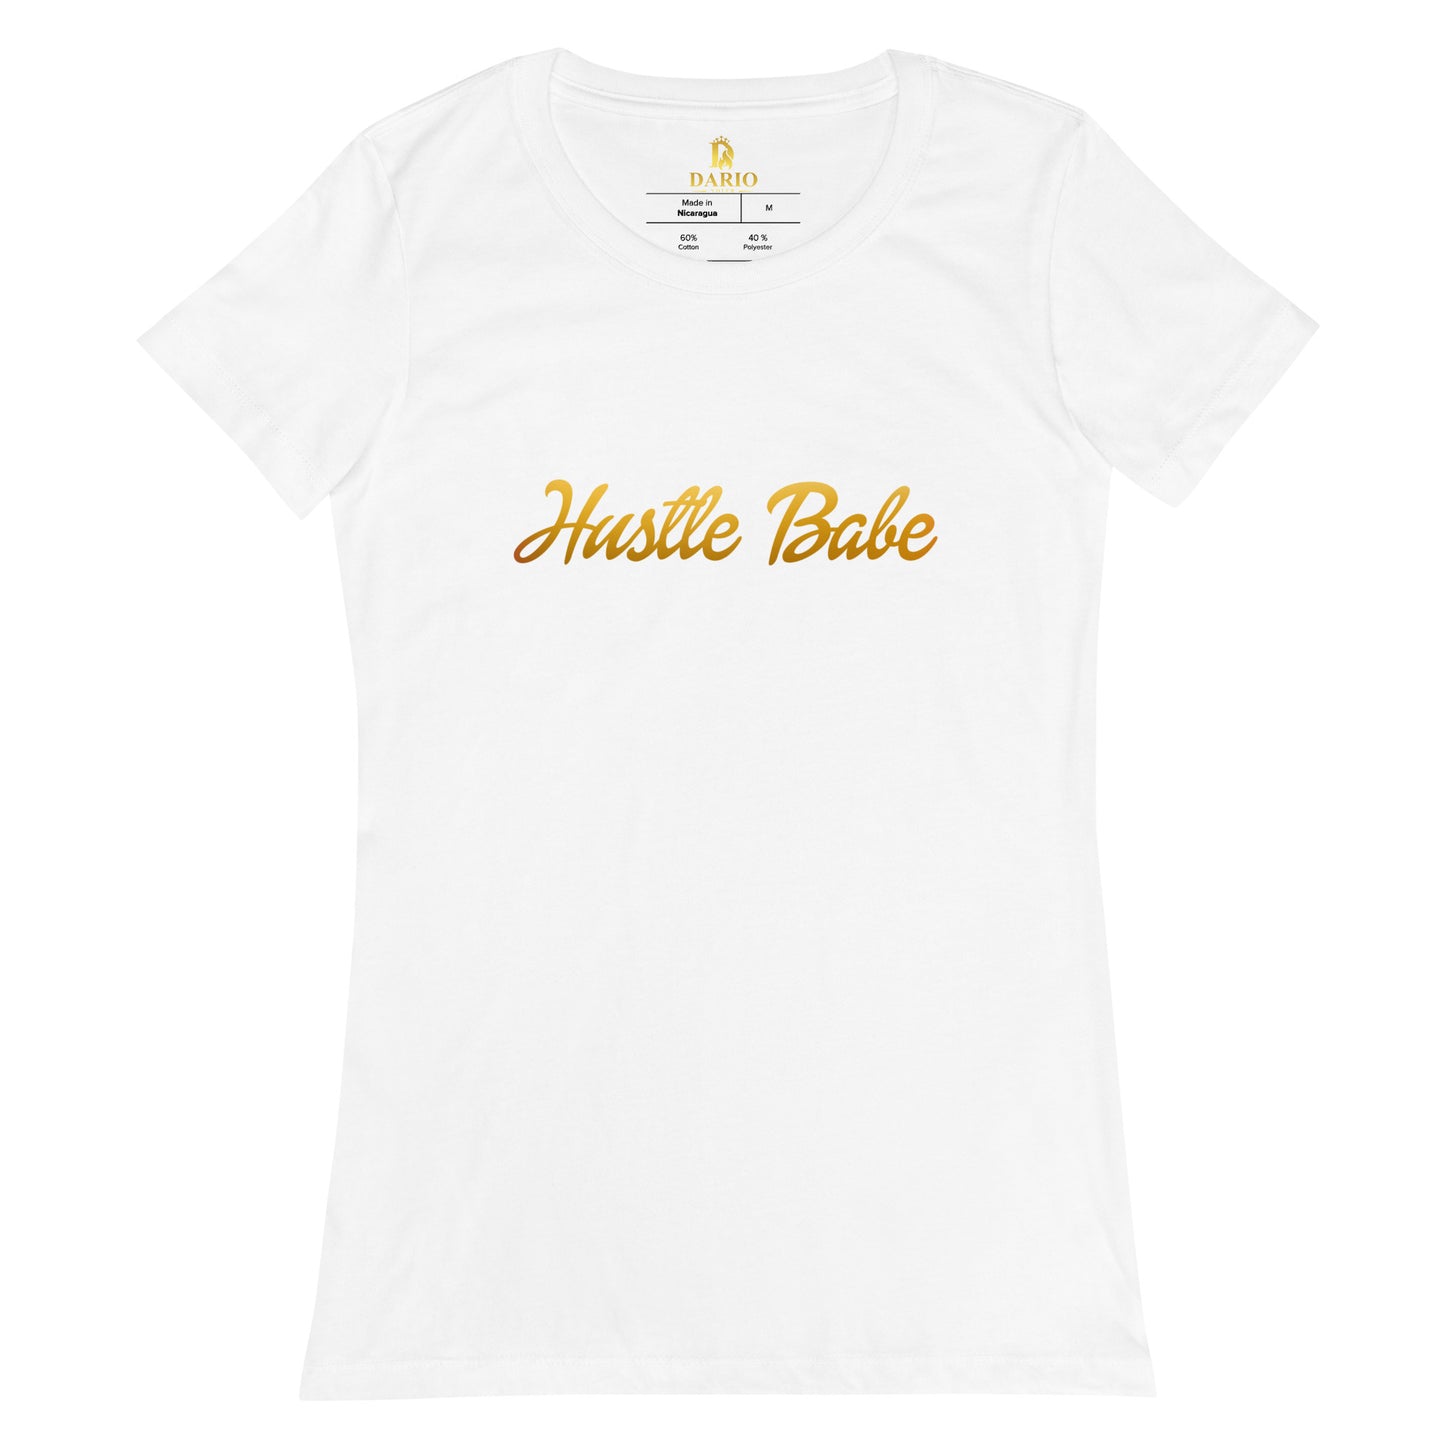 Women’s fitted Hustle Babe Gold Font Tee